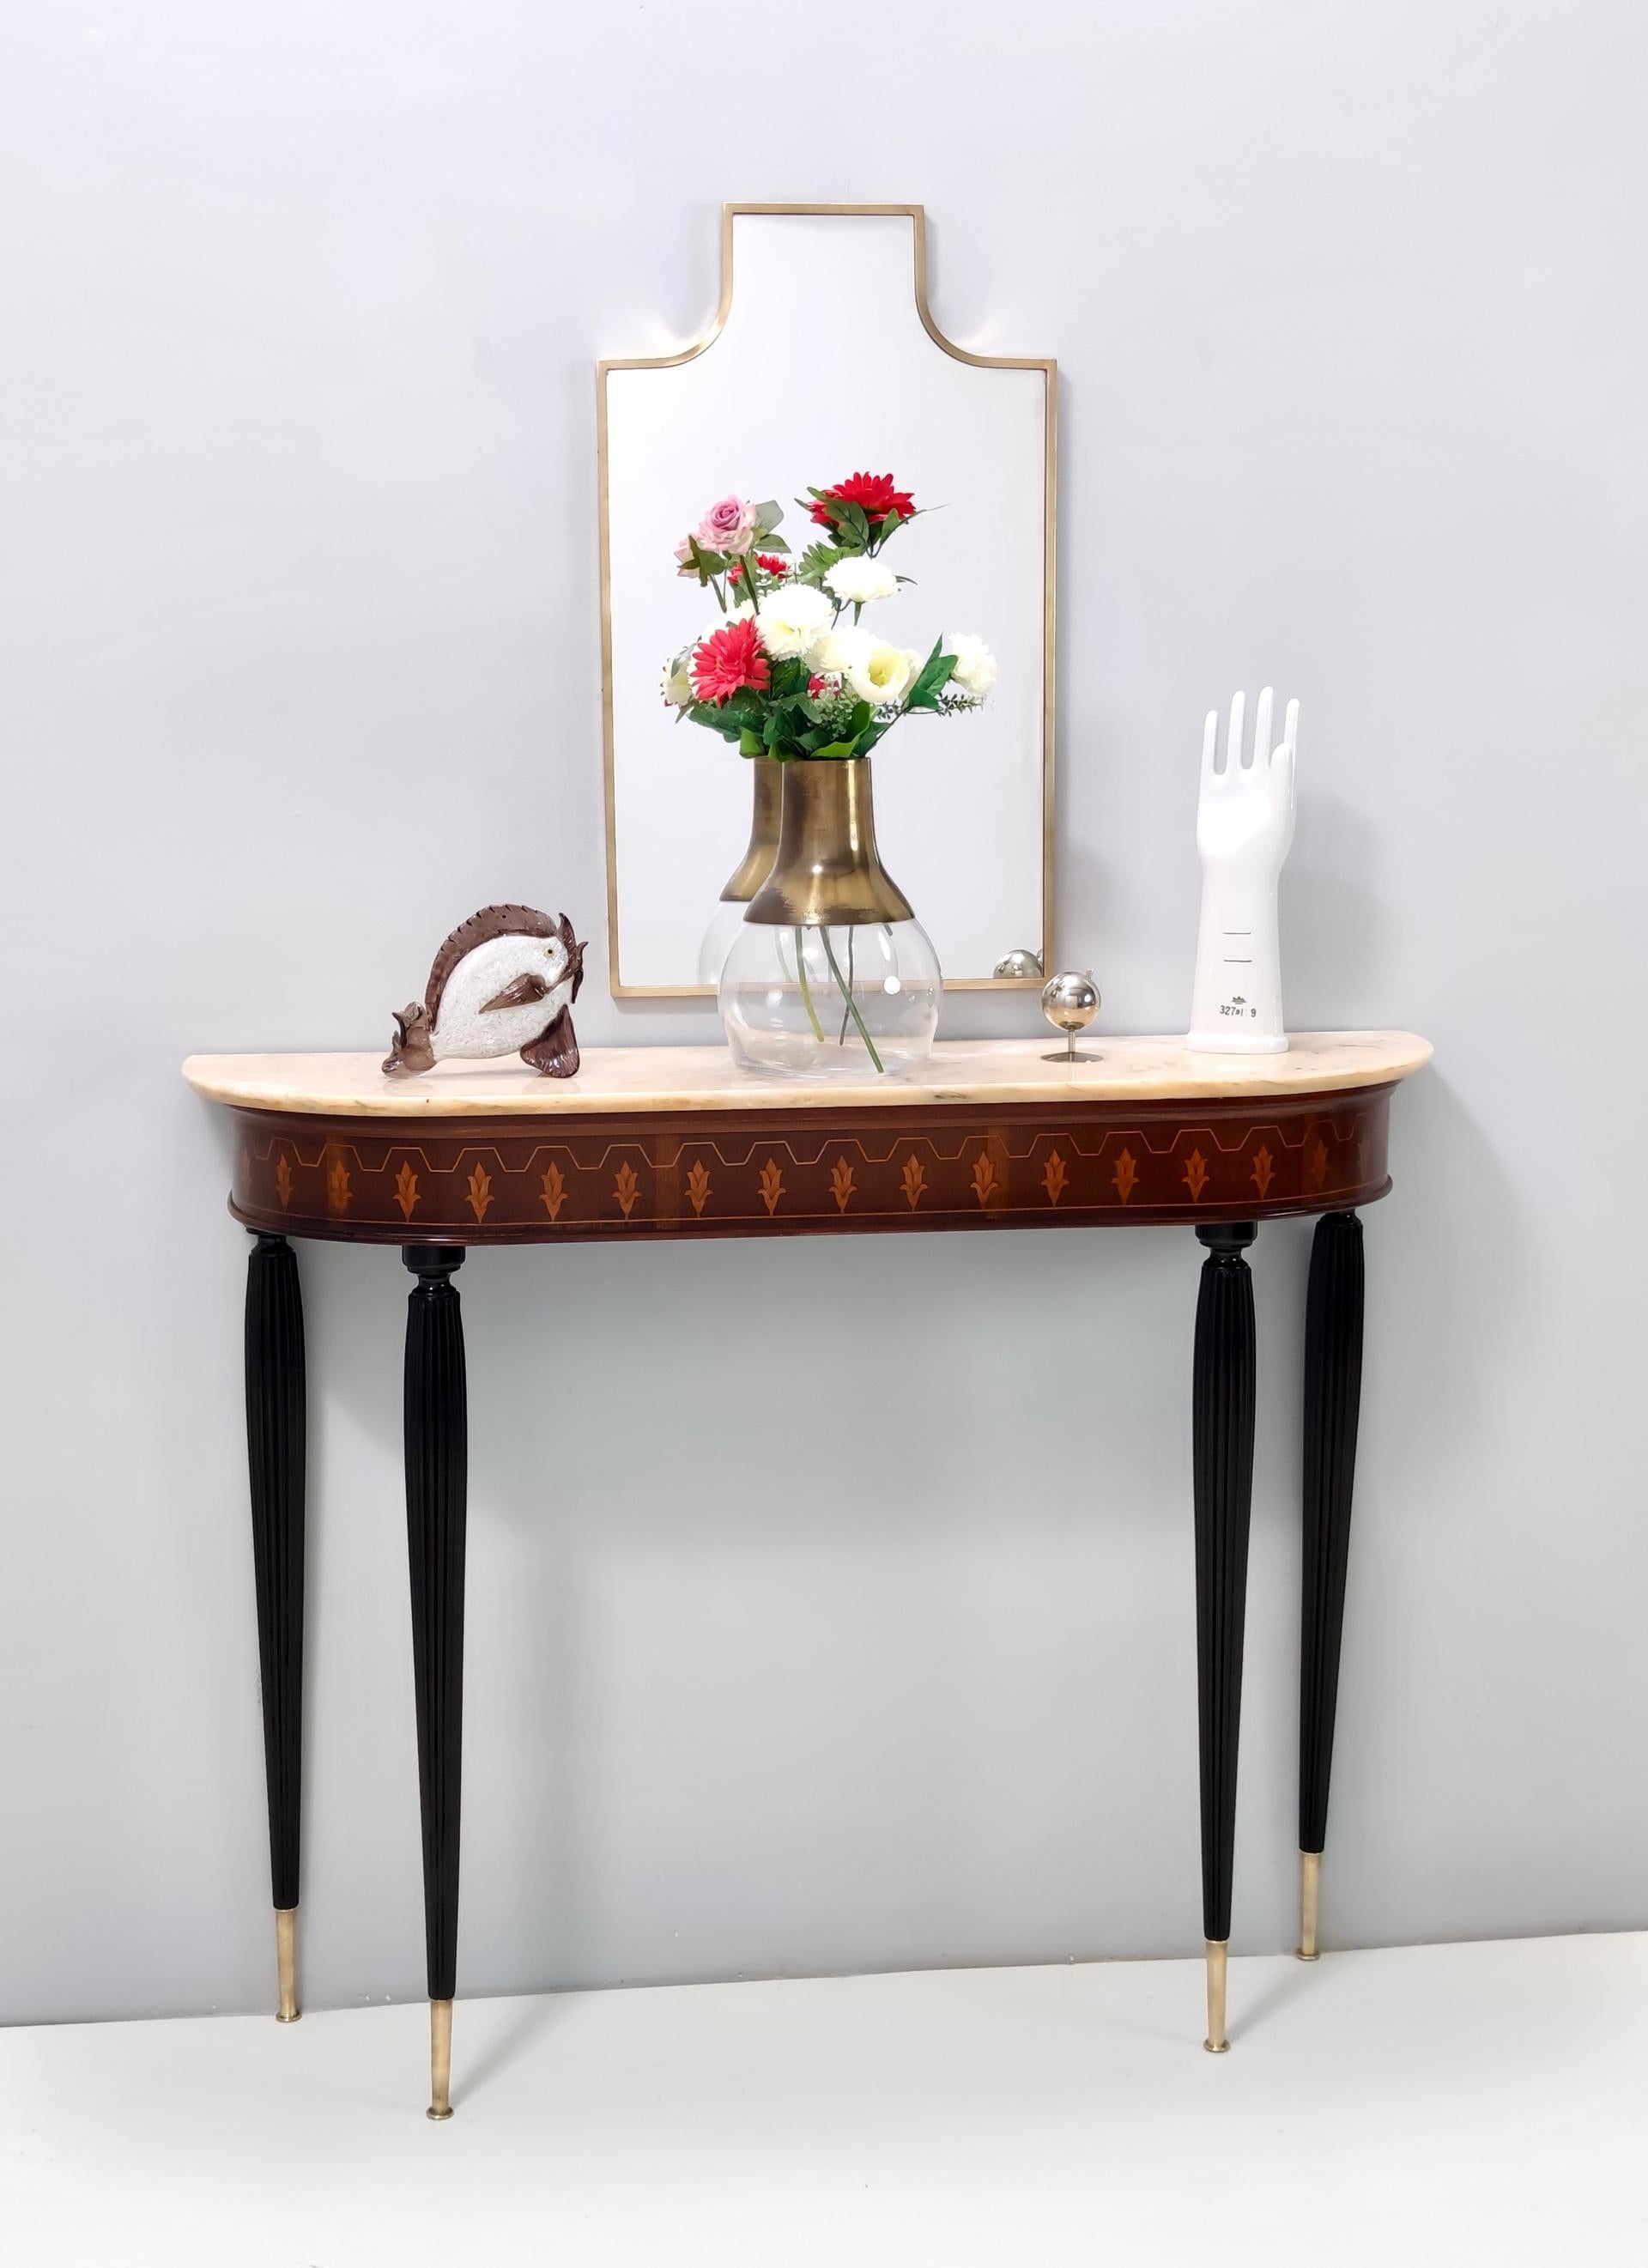 Made in Italy, 1950s.
It features a beech and walnut frame with brass feet caps and a demilune Portuguese pink marble top.
This console may show slight traces of use since it's vintage, but it can be considered as in perfect original condition and